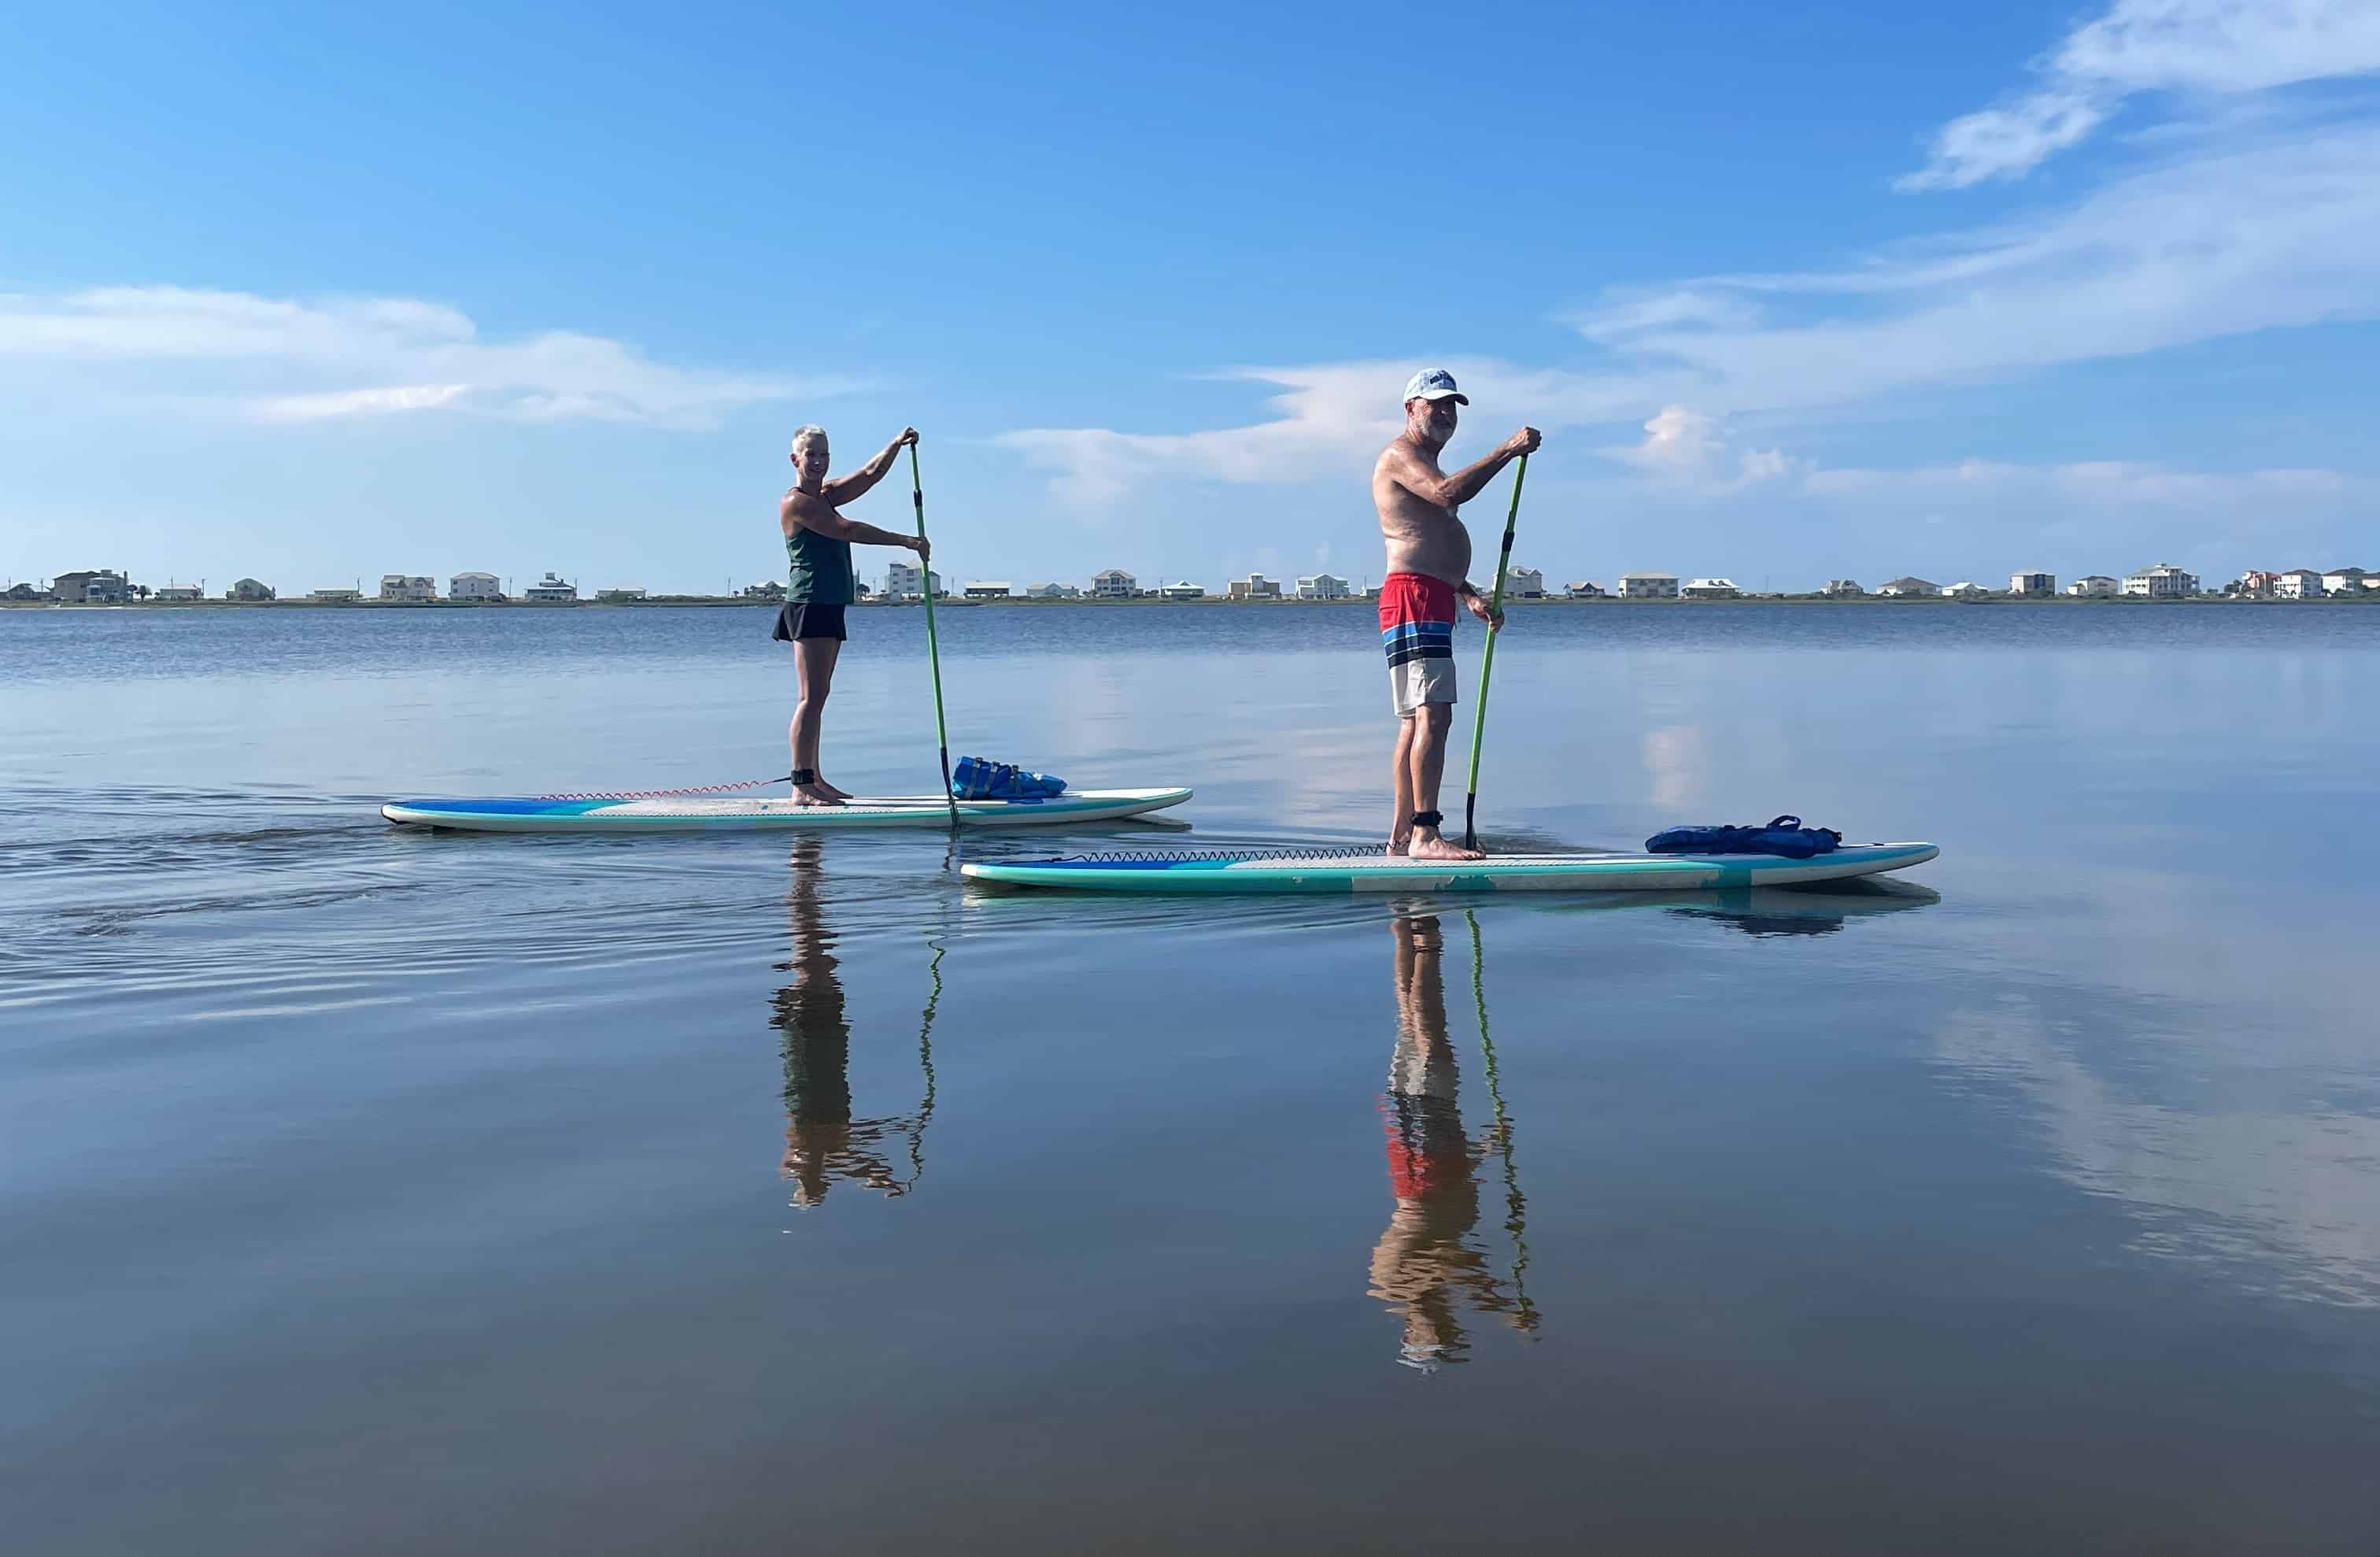 Gulf-Shores-Paddleboarding-Lesson-and-Tour